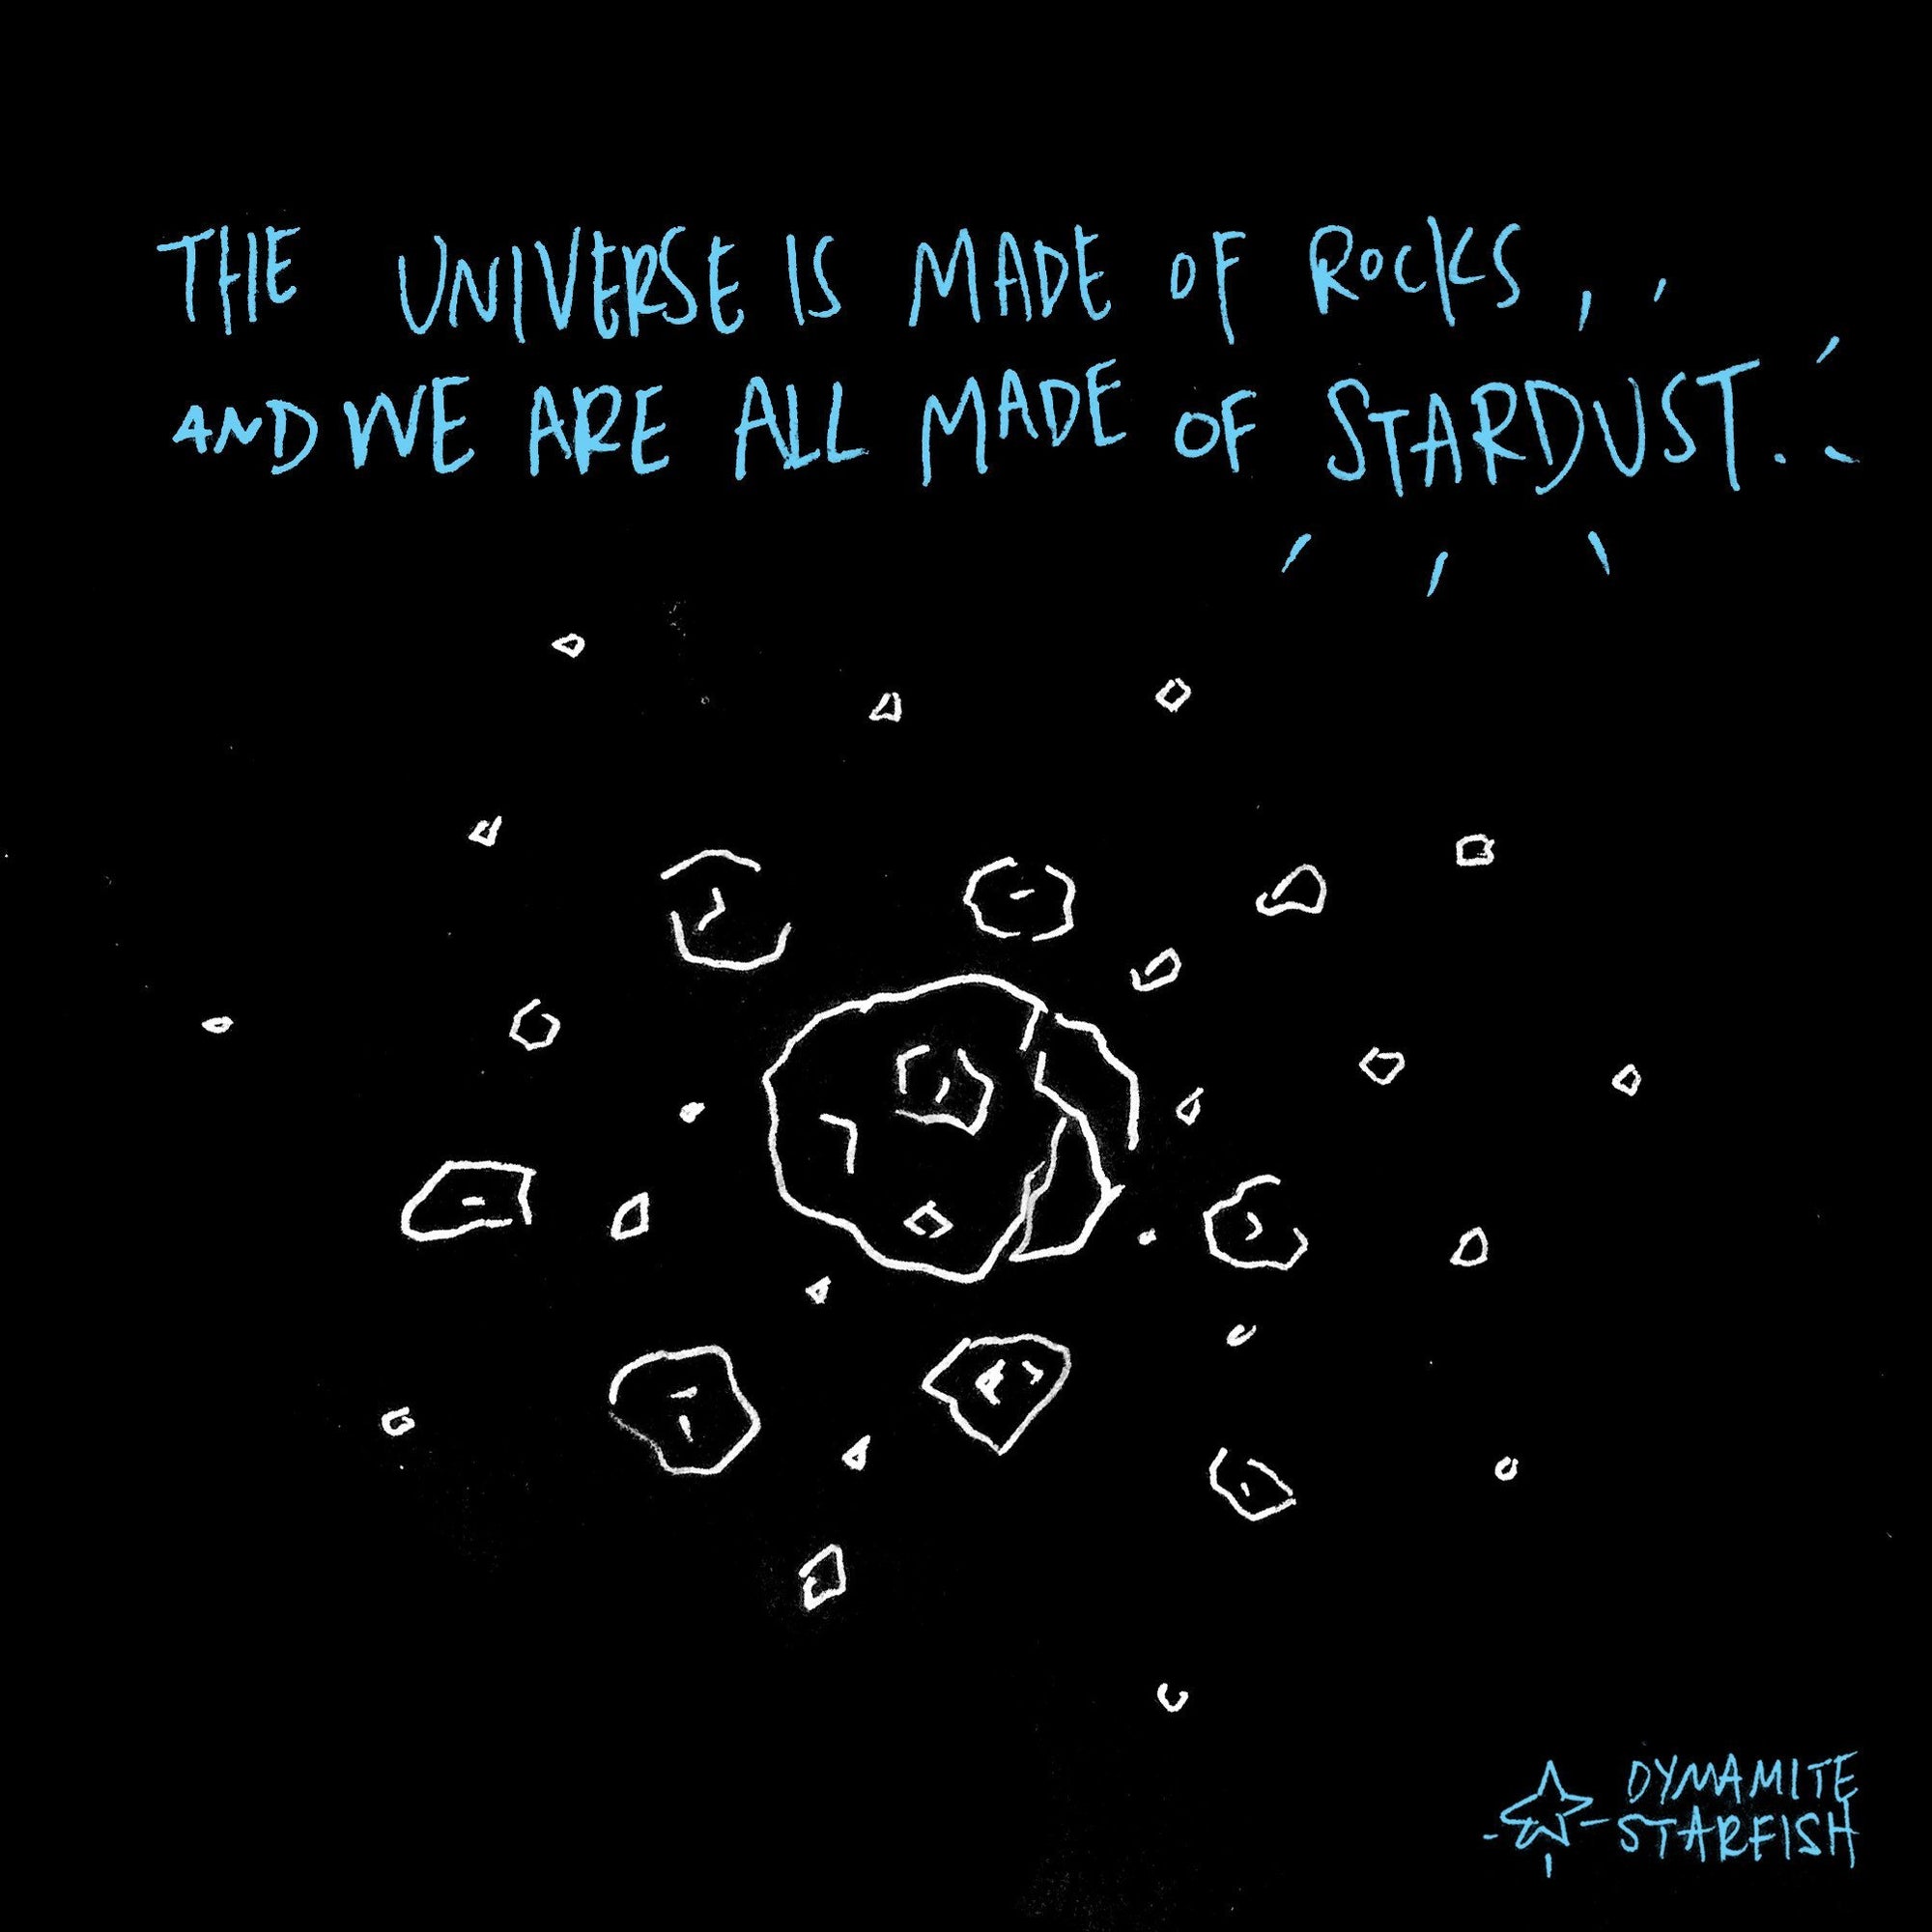 The universe is made of rocks, and we are all made of stardust | Dynamite Starfish